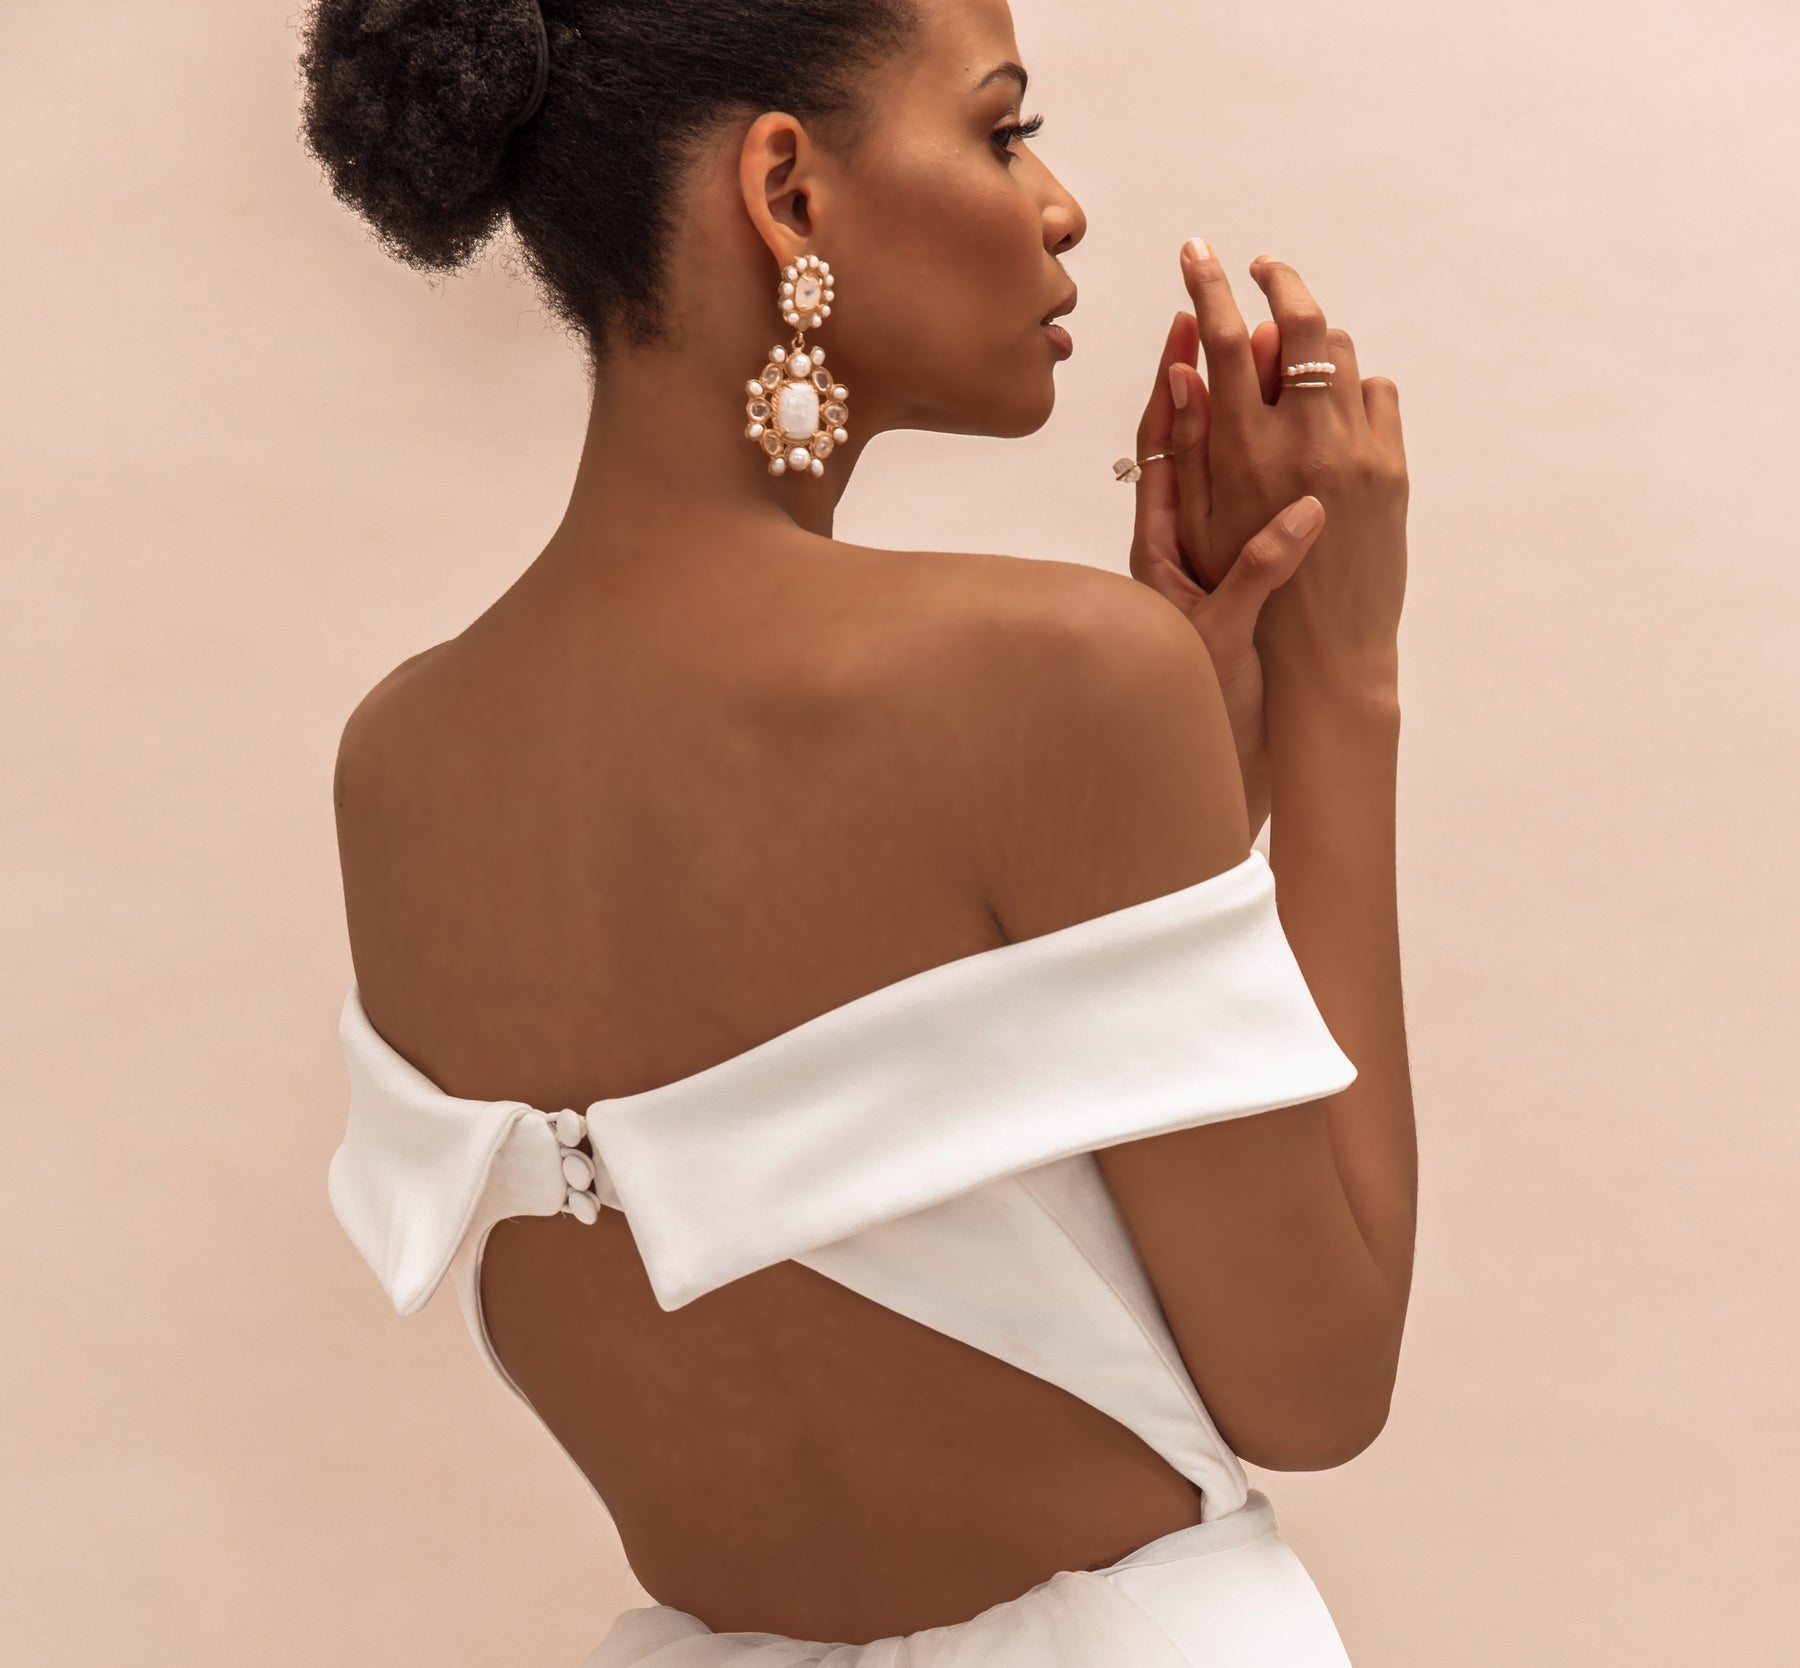 Profile of woman in white dress showcasing her jewelry